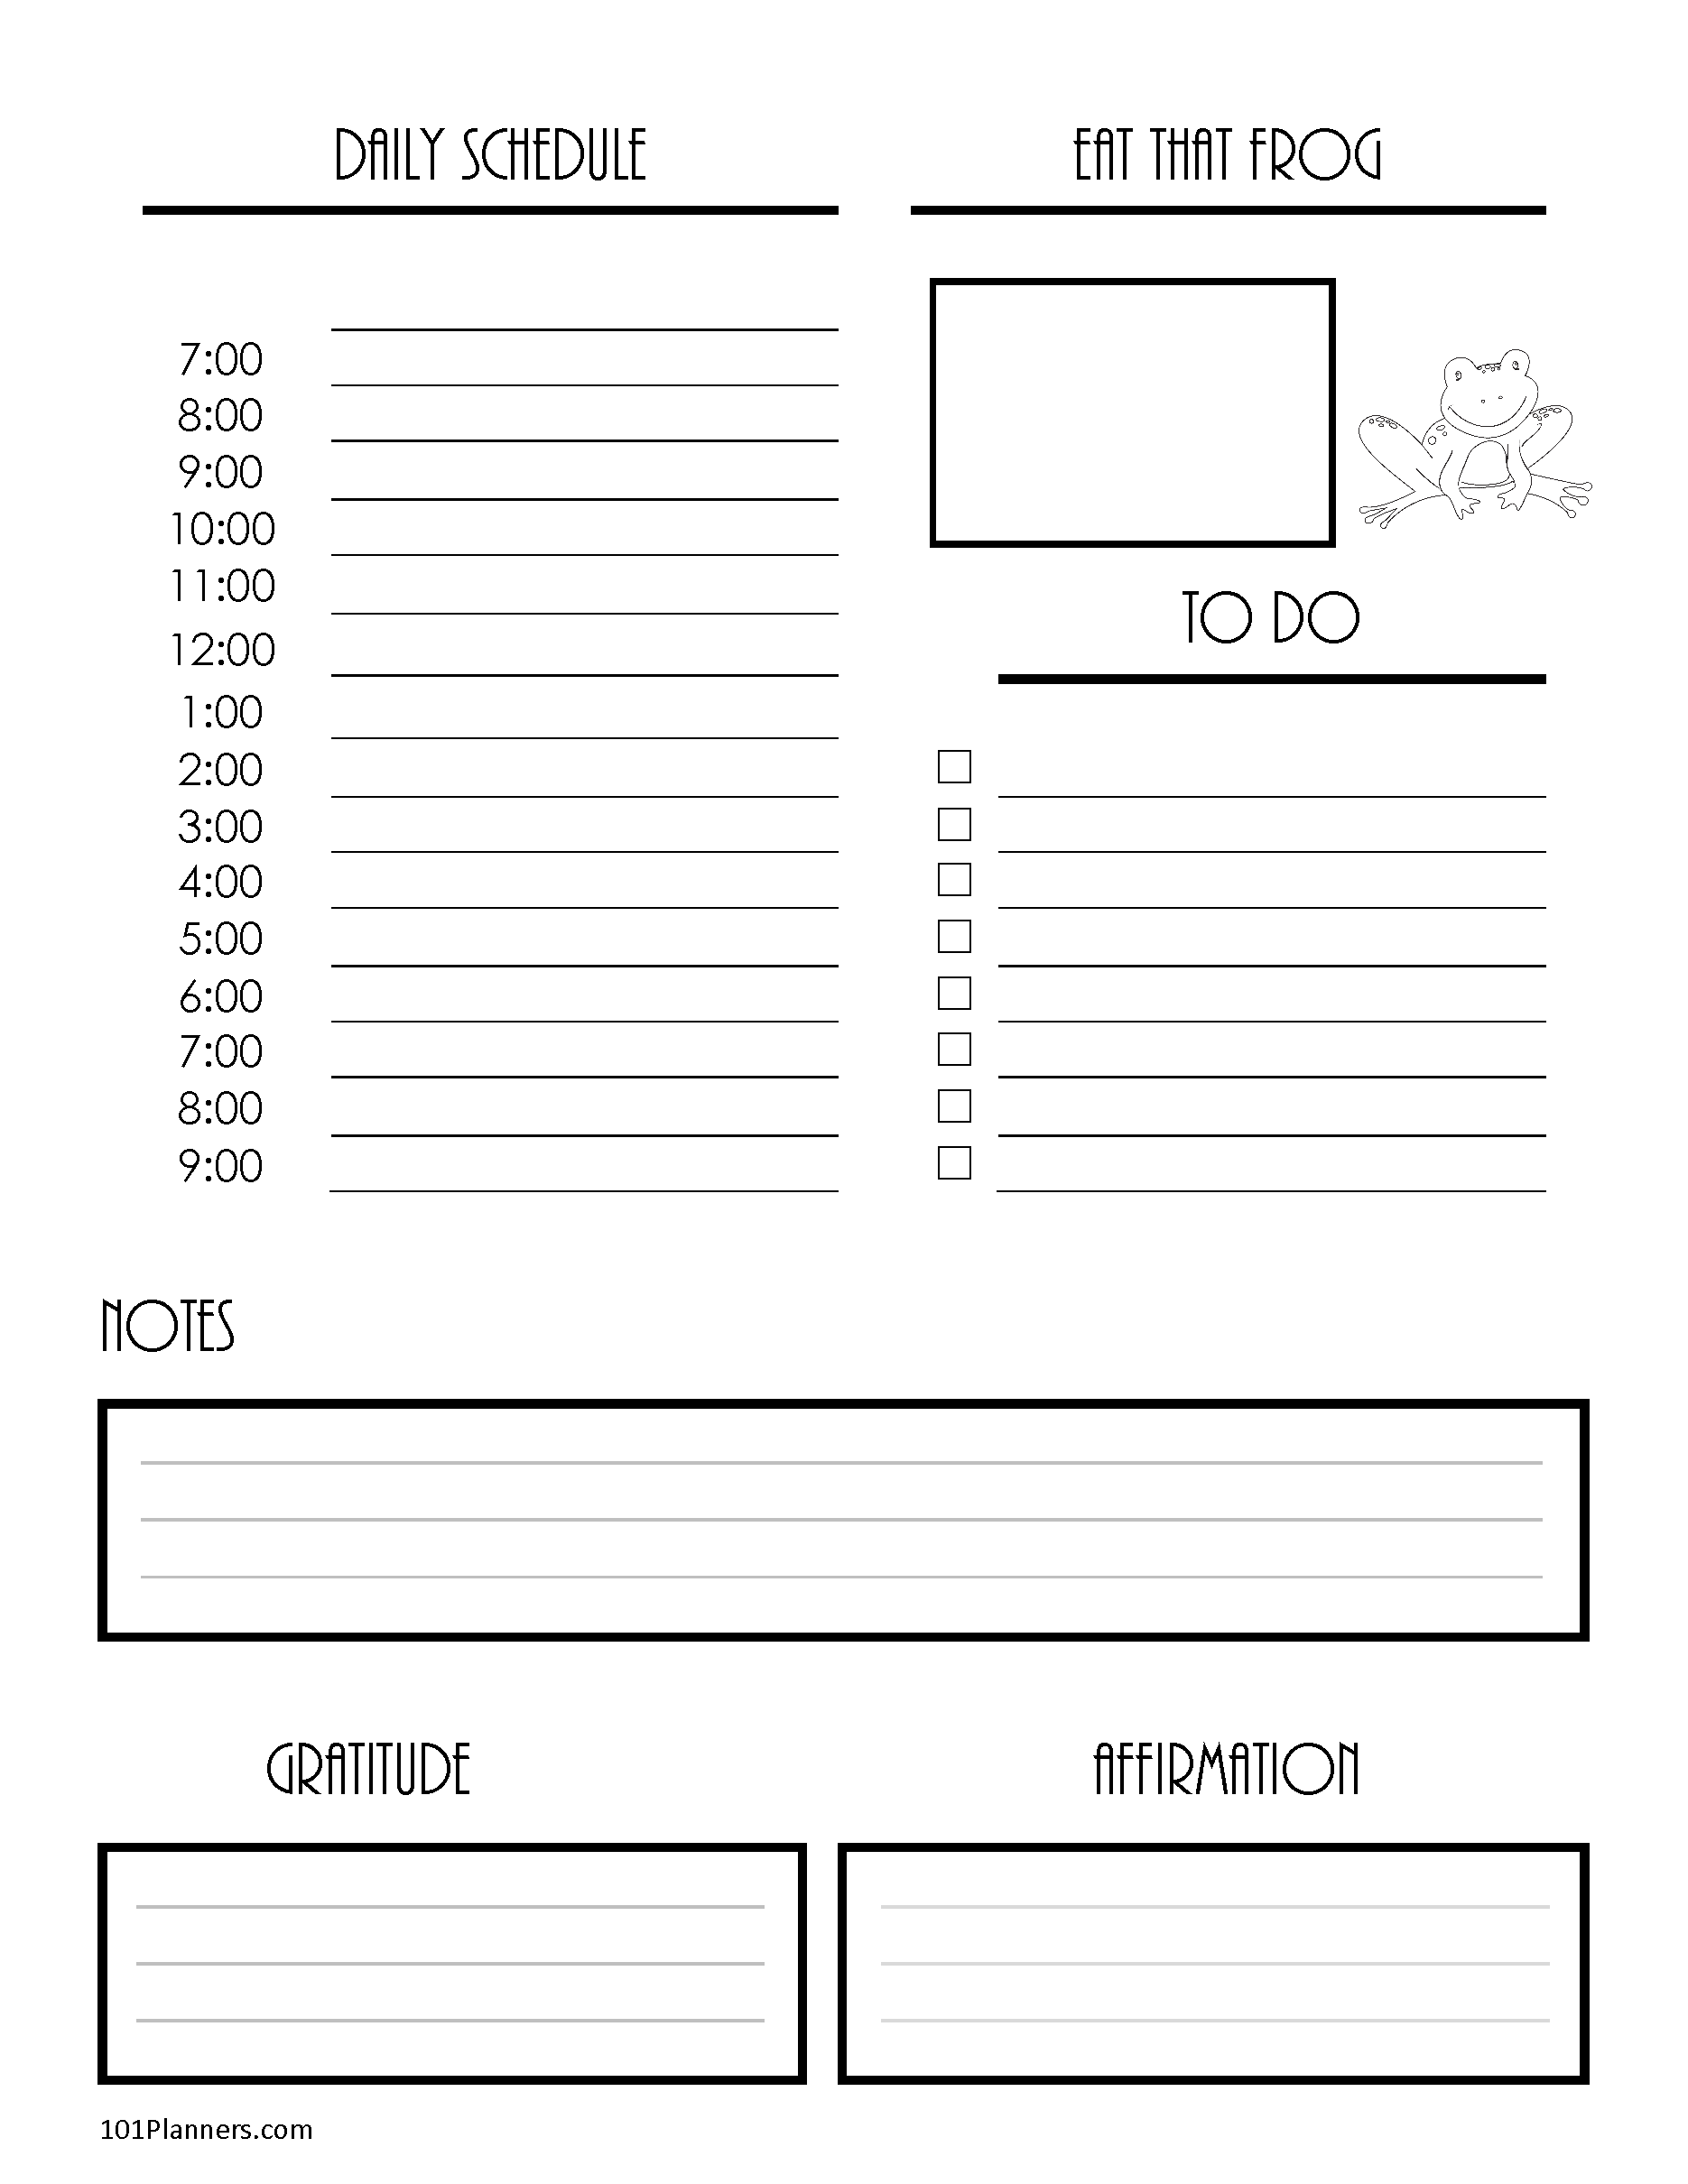 Free Printable Daily Planner Template to Get More Done